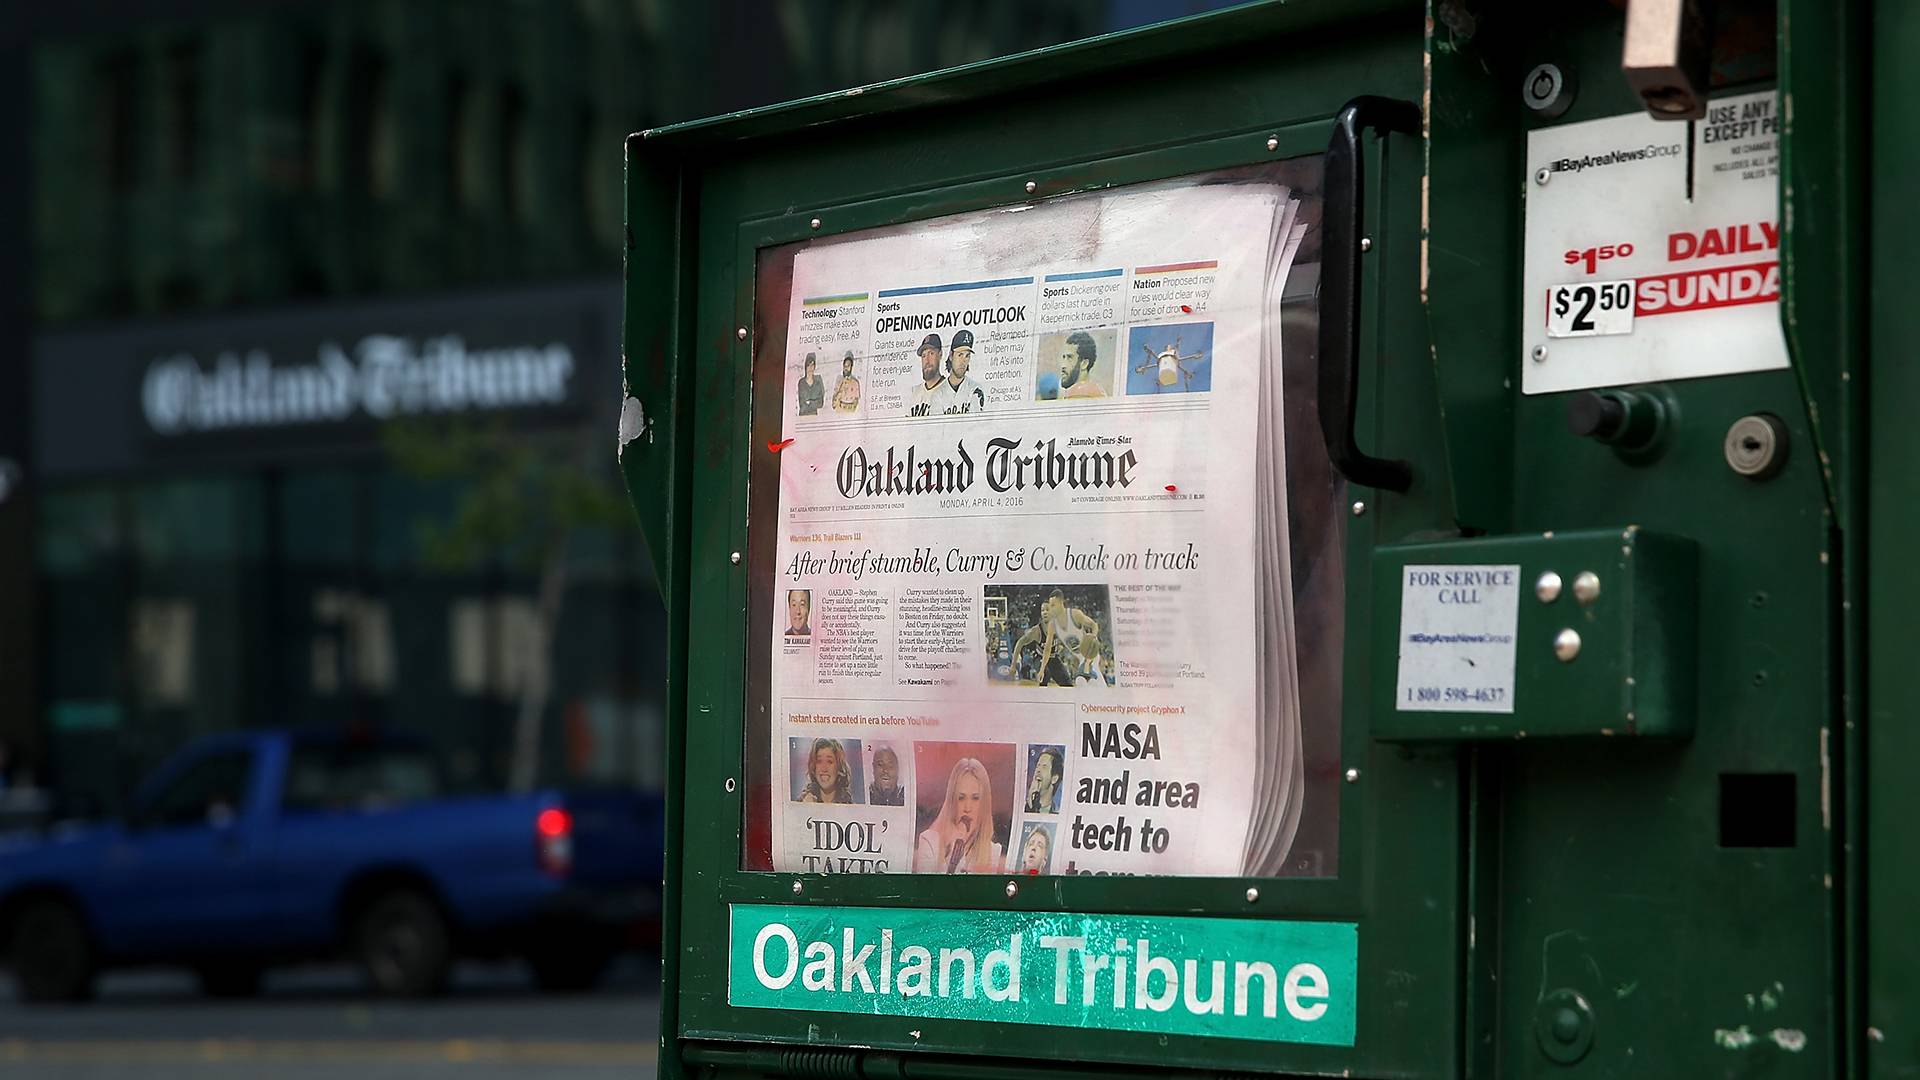 The final edition of the Oakland Tribune is displayed in a newspaper rack in front of the Oakland Tribune offices on April 4, 2016. Justin Sullivan/Getty Images